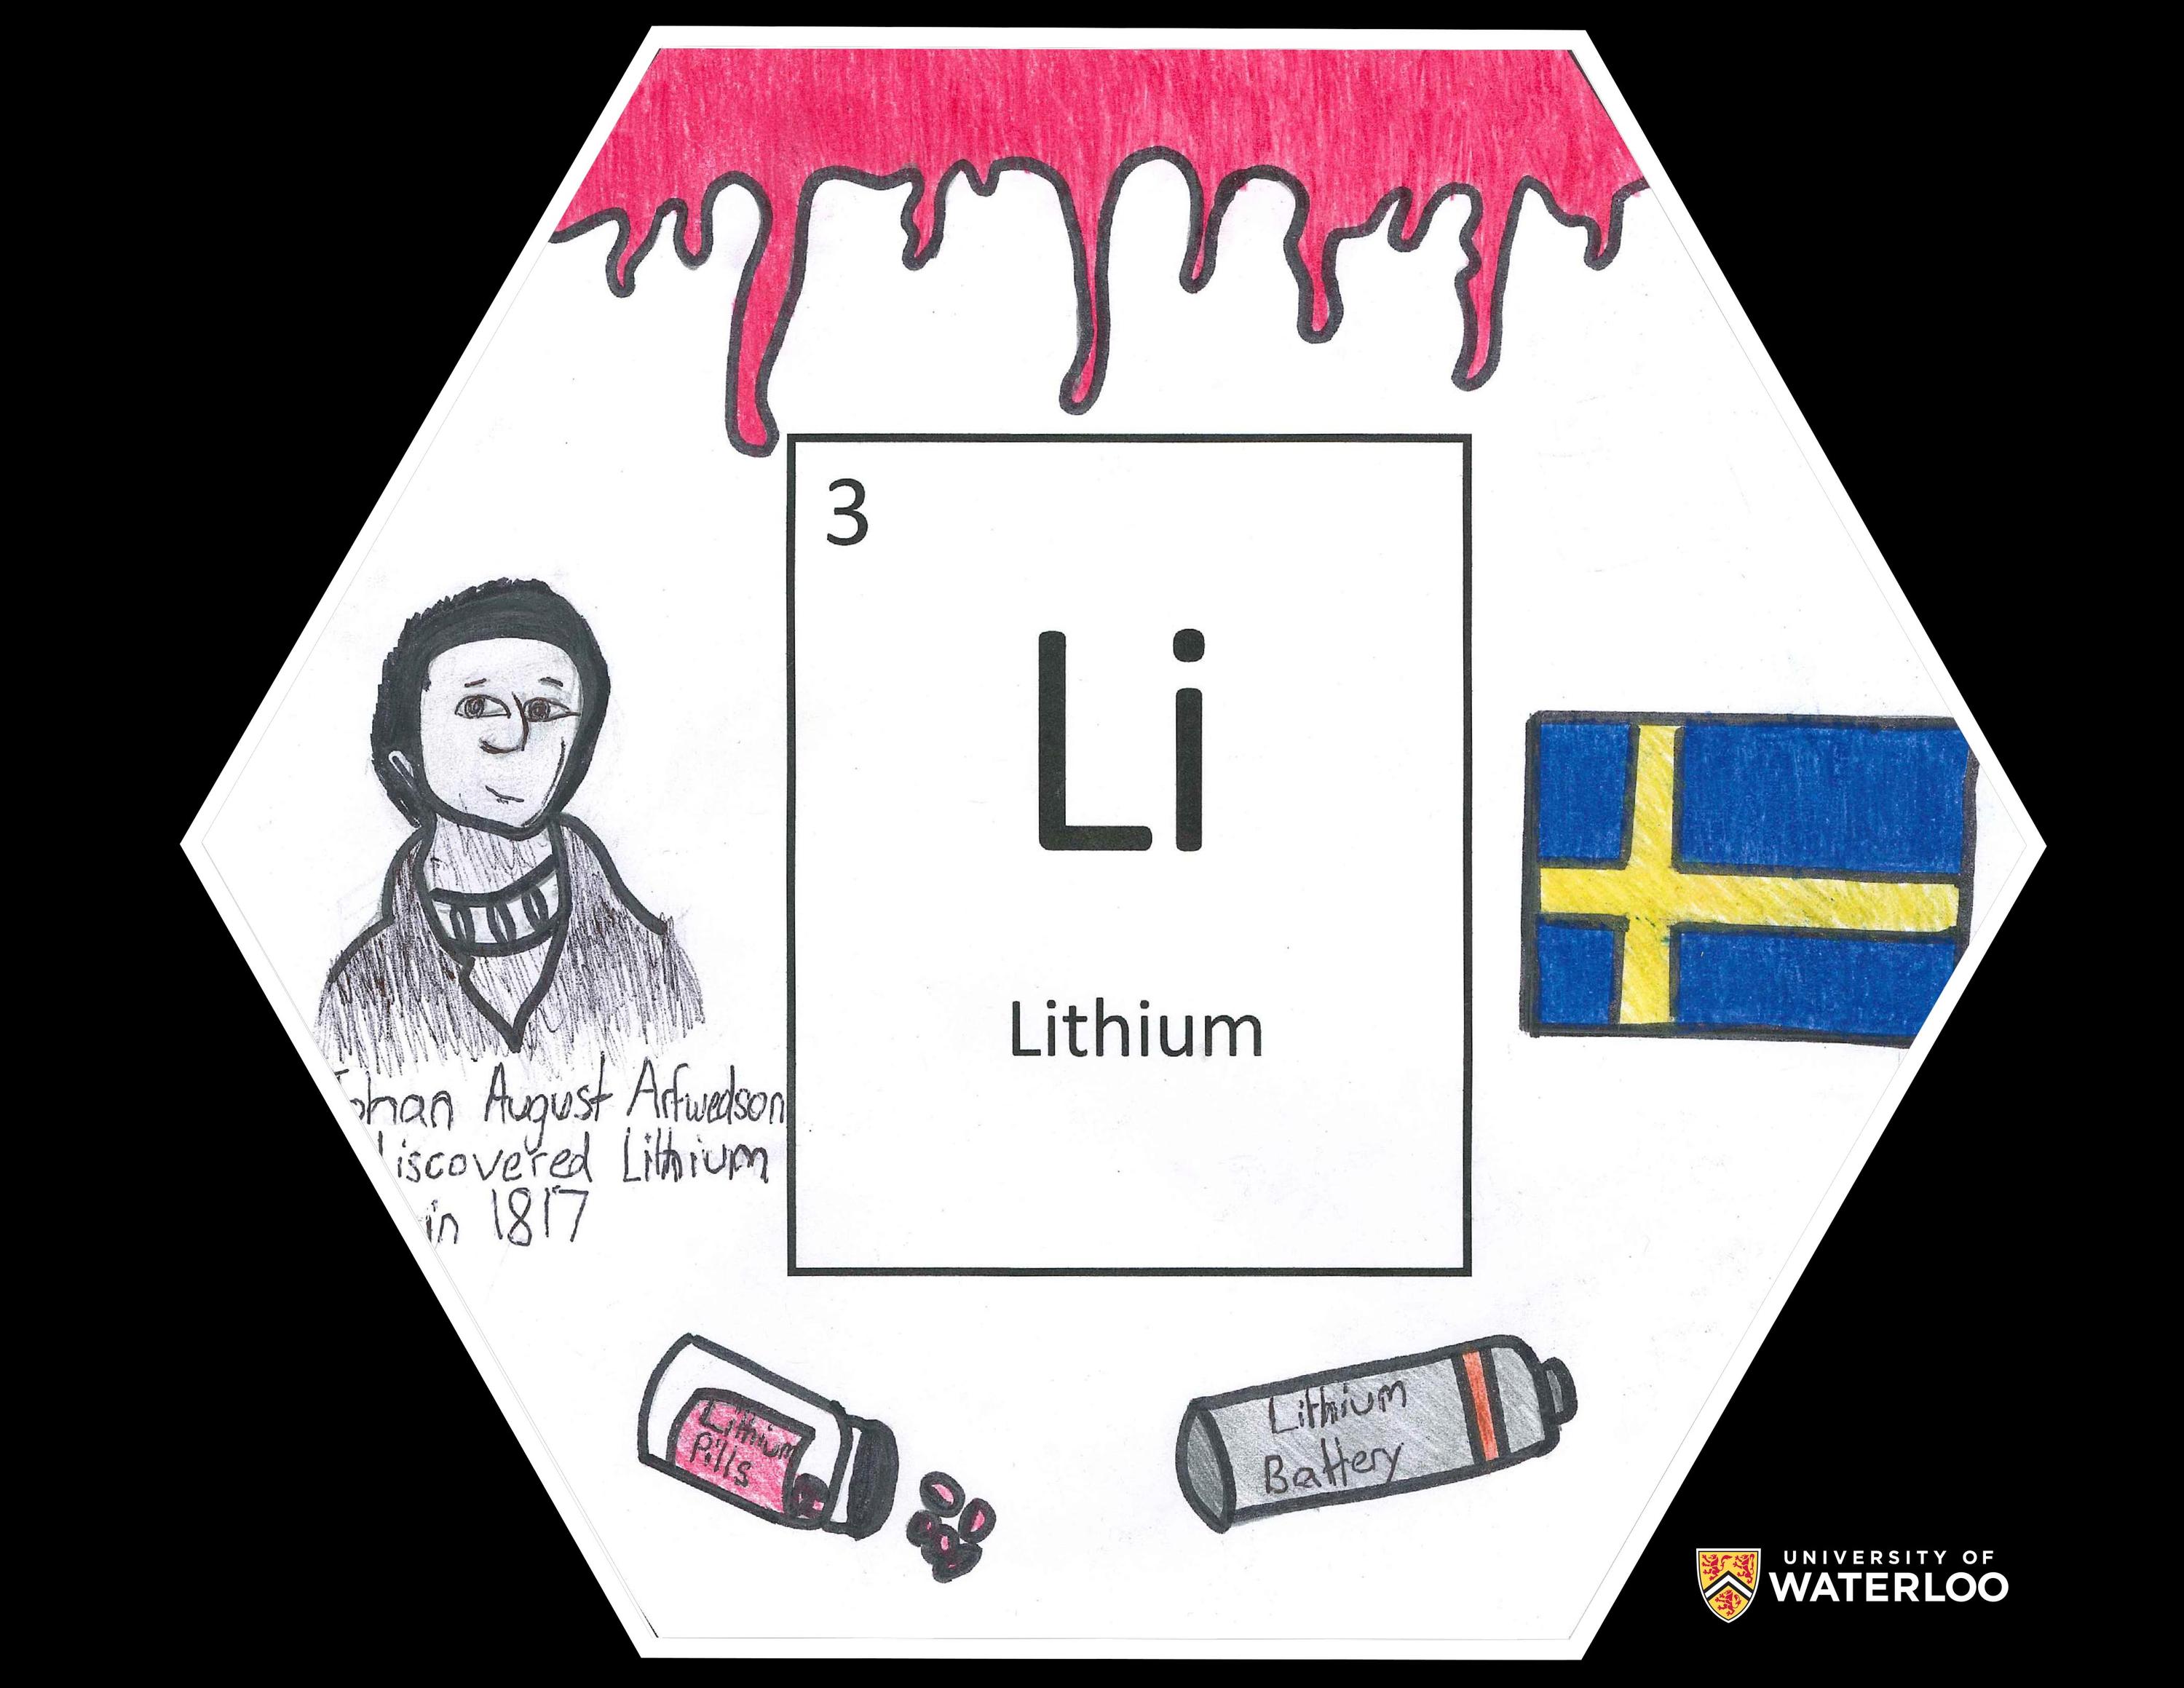 Colored pencil on white paper. Simple periodic table tile of “Li” surrounded by August Arwedson who “Discovered lithium in 1817”, Magenta flames, Swedish flag, bottle of lithium pills and a lithium battery.